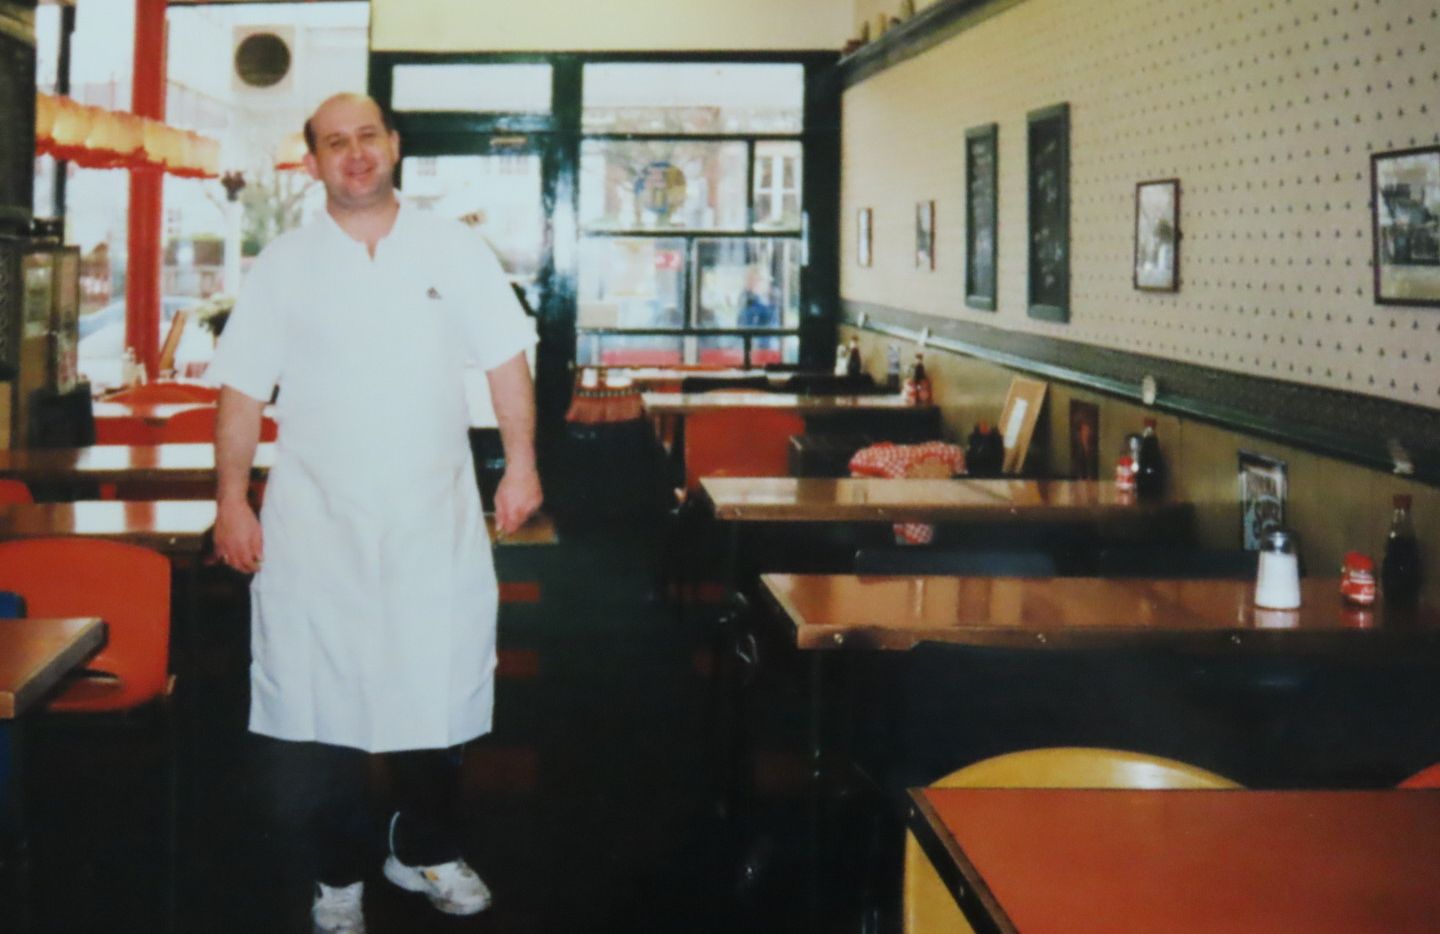 Paul McDonald at the Cleveland Cafe on Lord Street in Southport in 2001